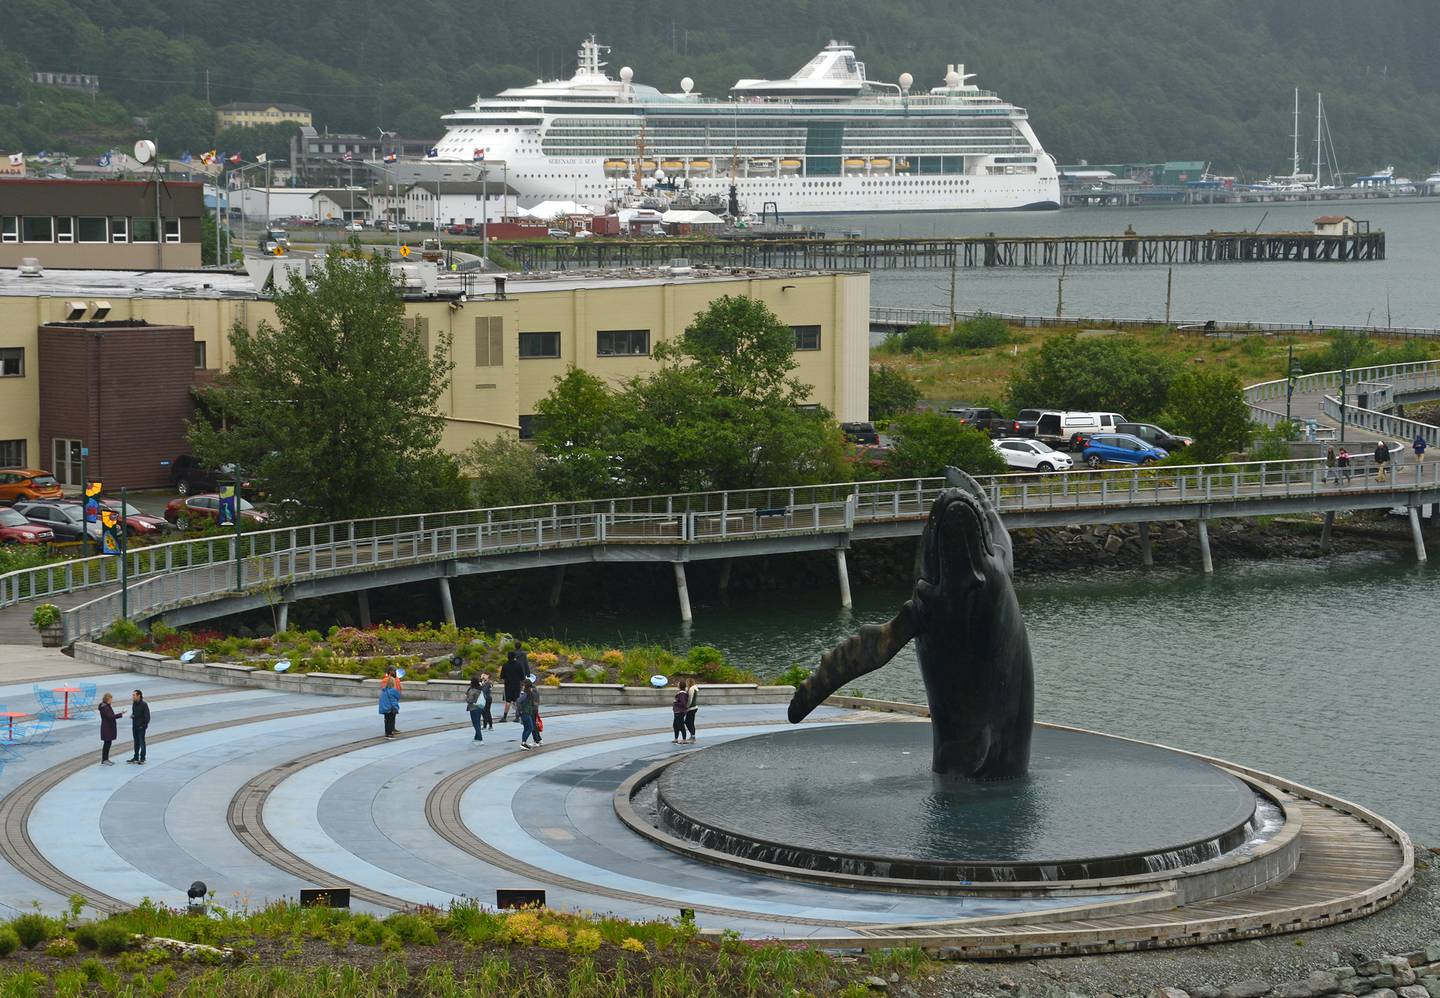 Cruise ship and whale statue